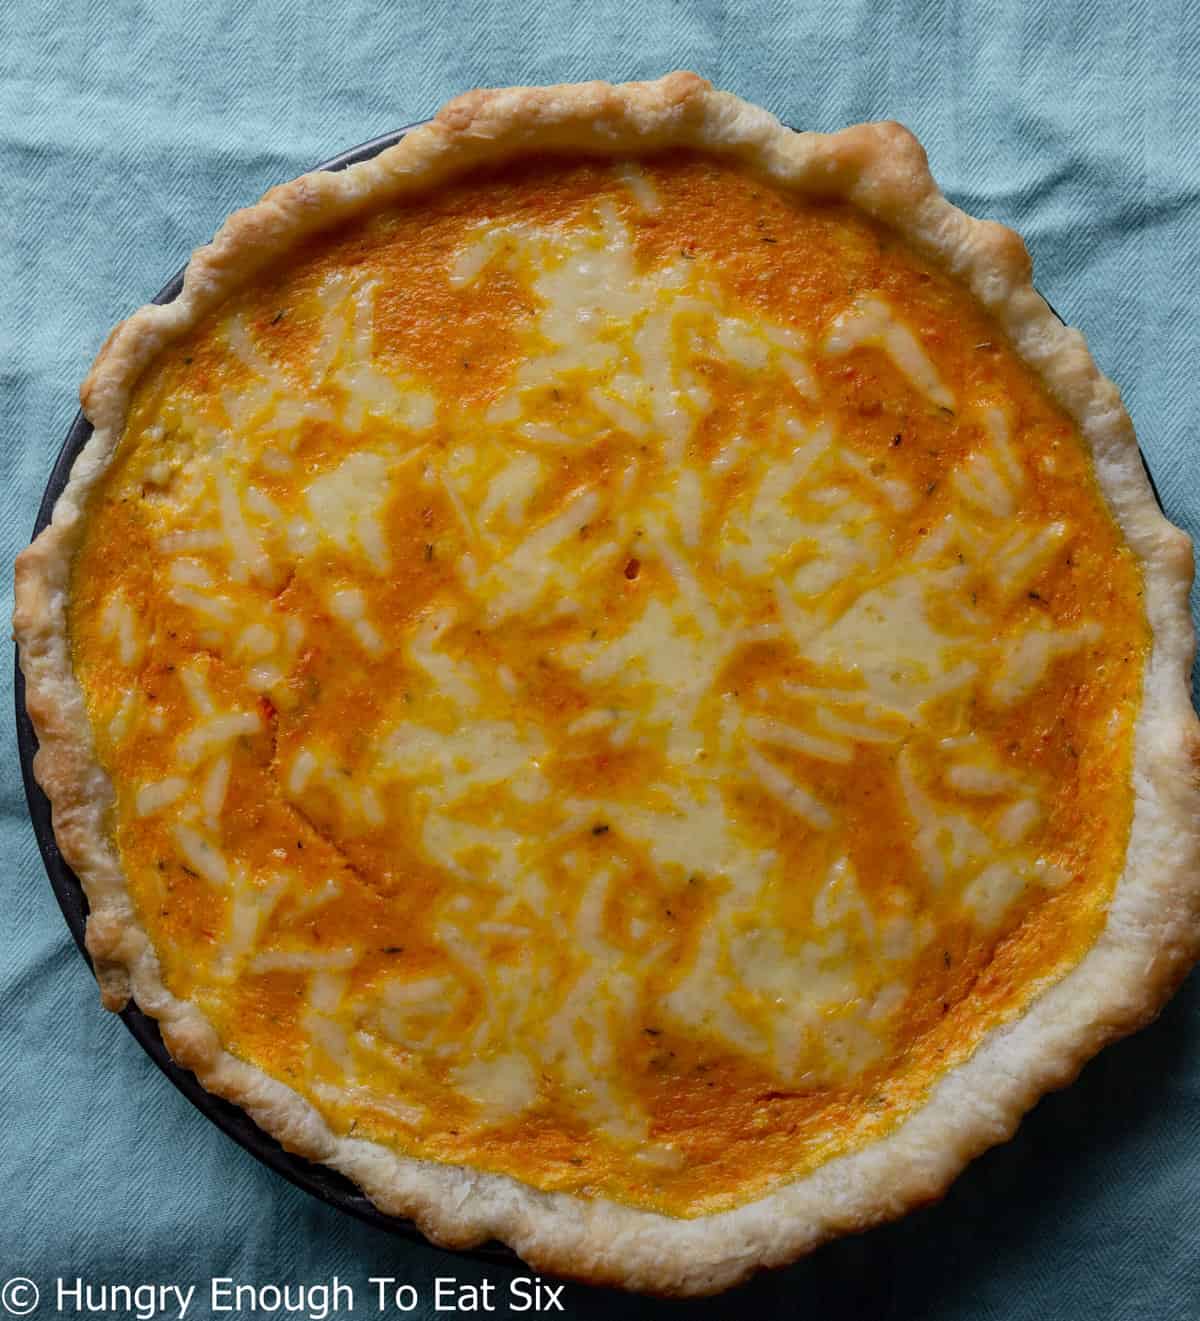 Baked carrot quiche with orange filling and melted cheese.